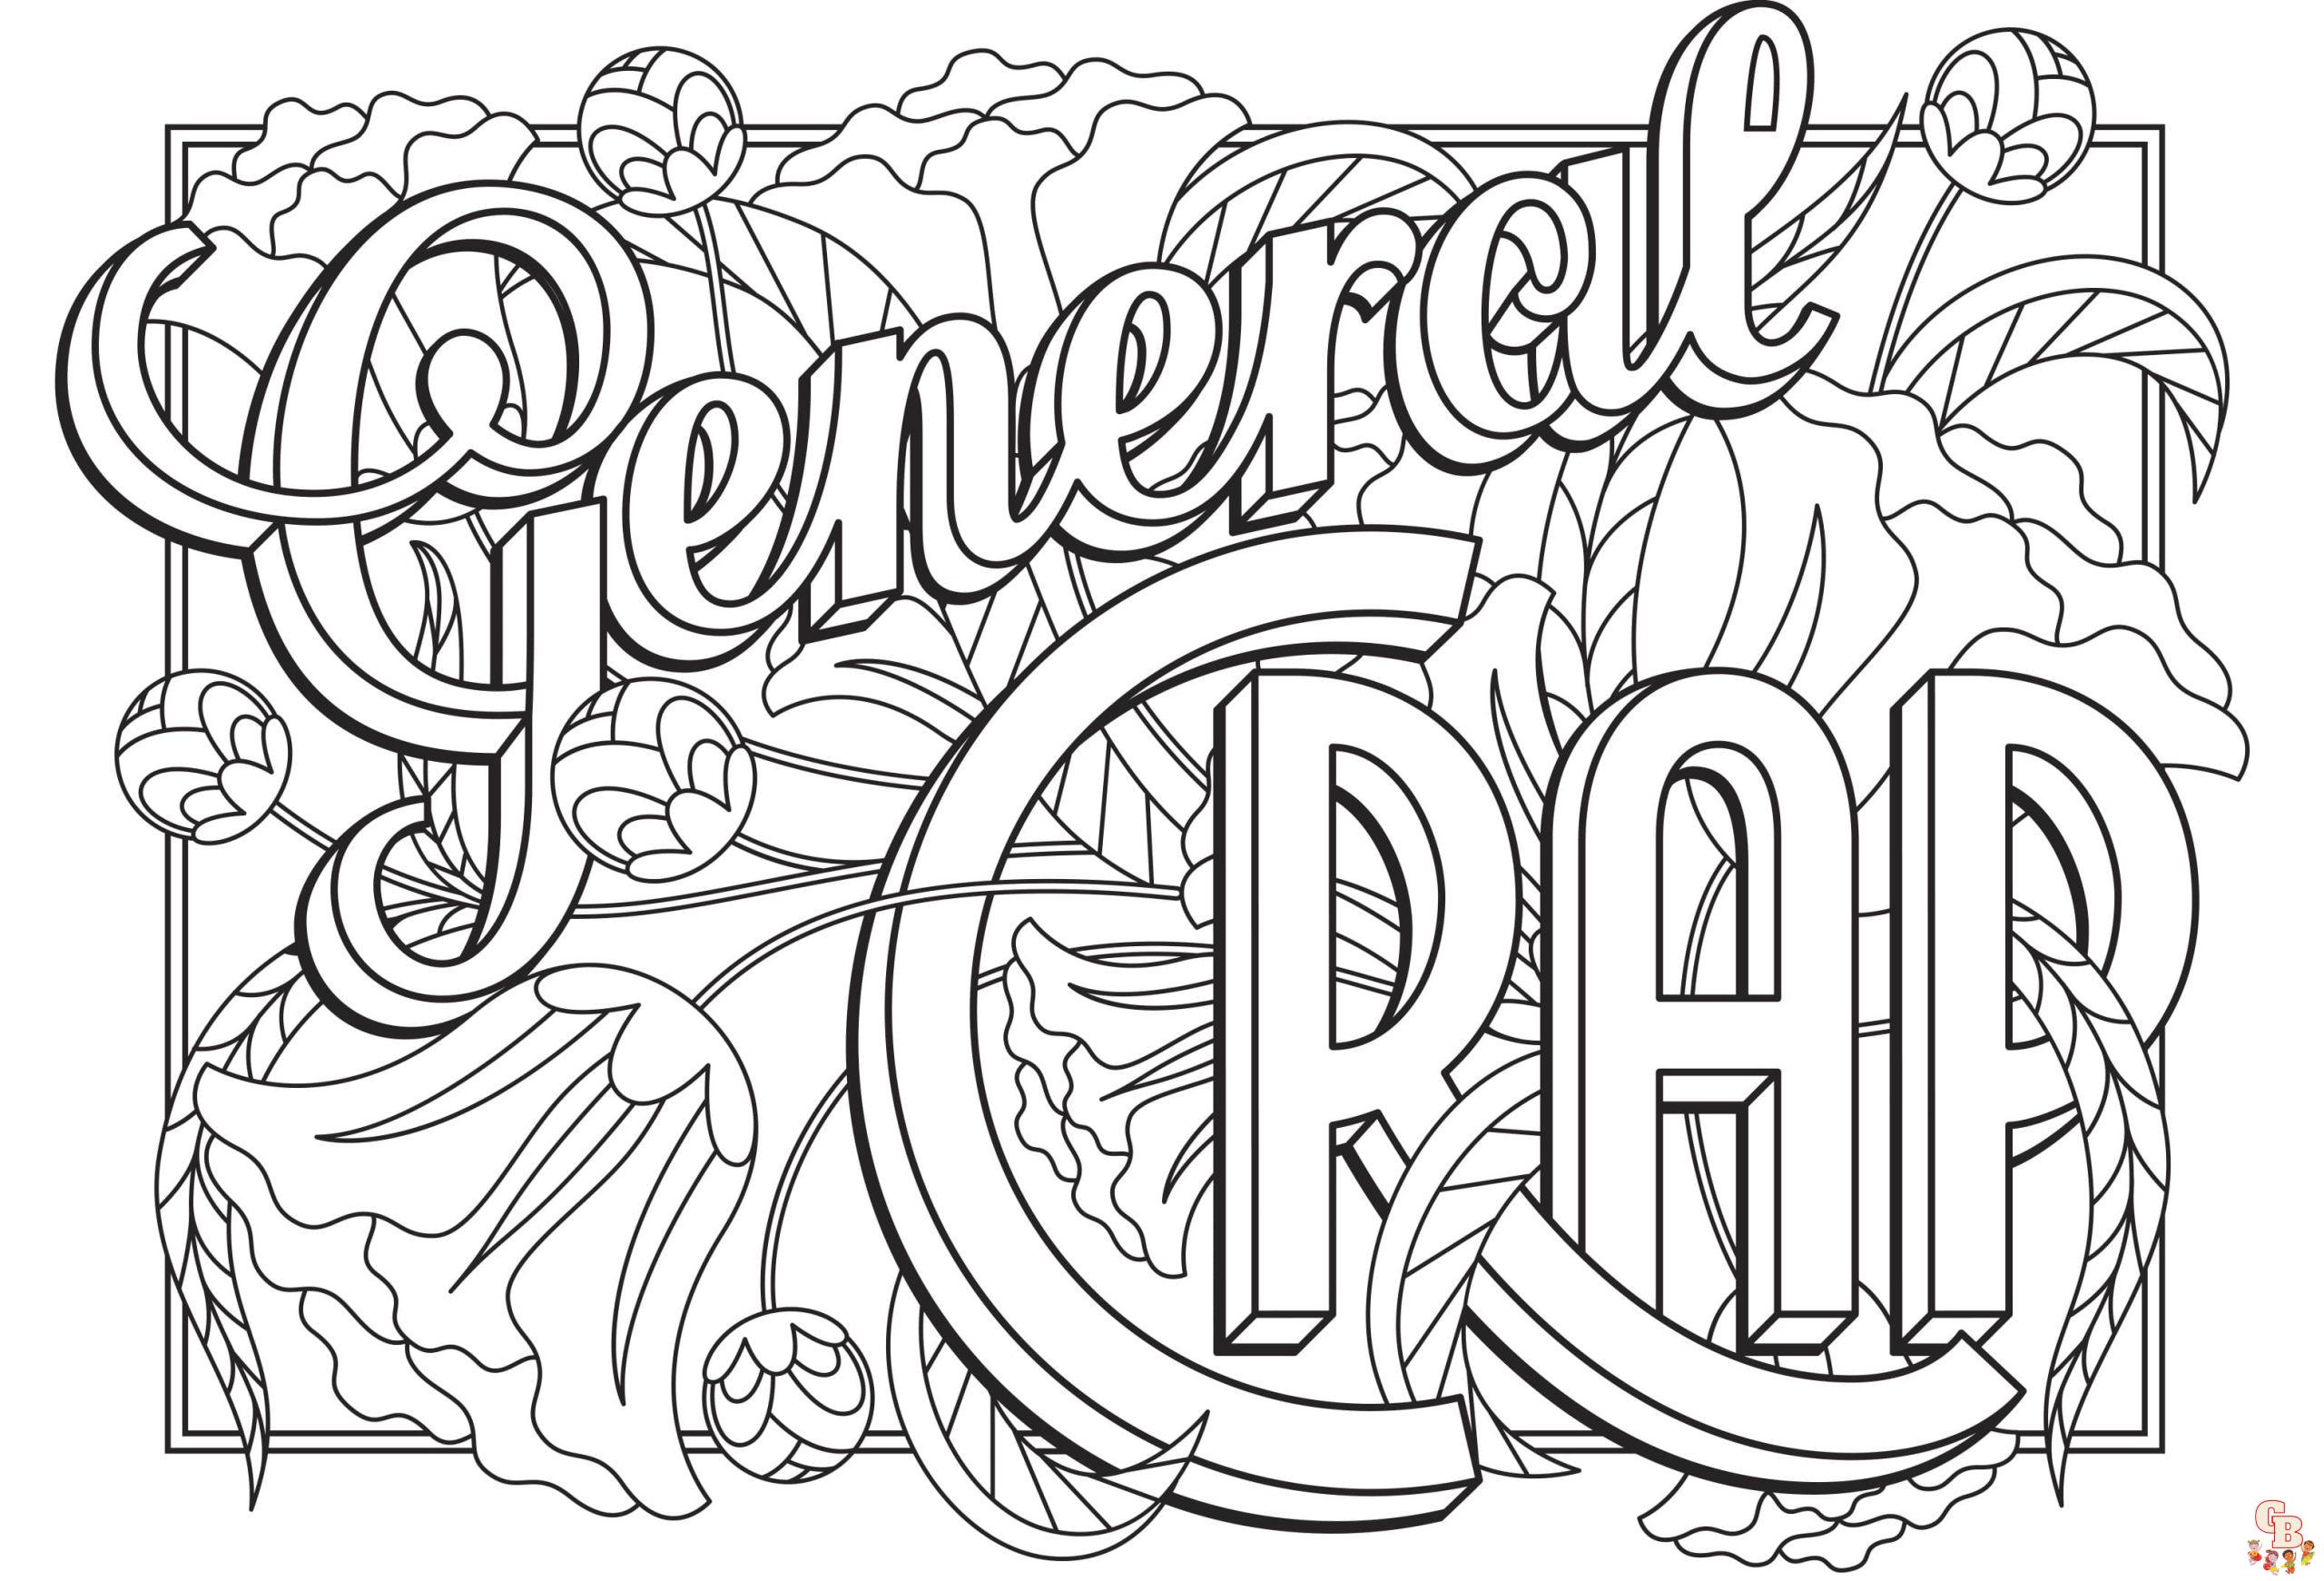 Printable r rated coloring pages free for kids and adults